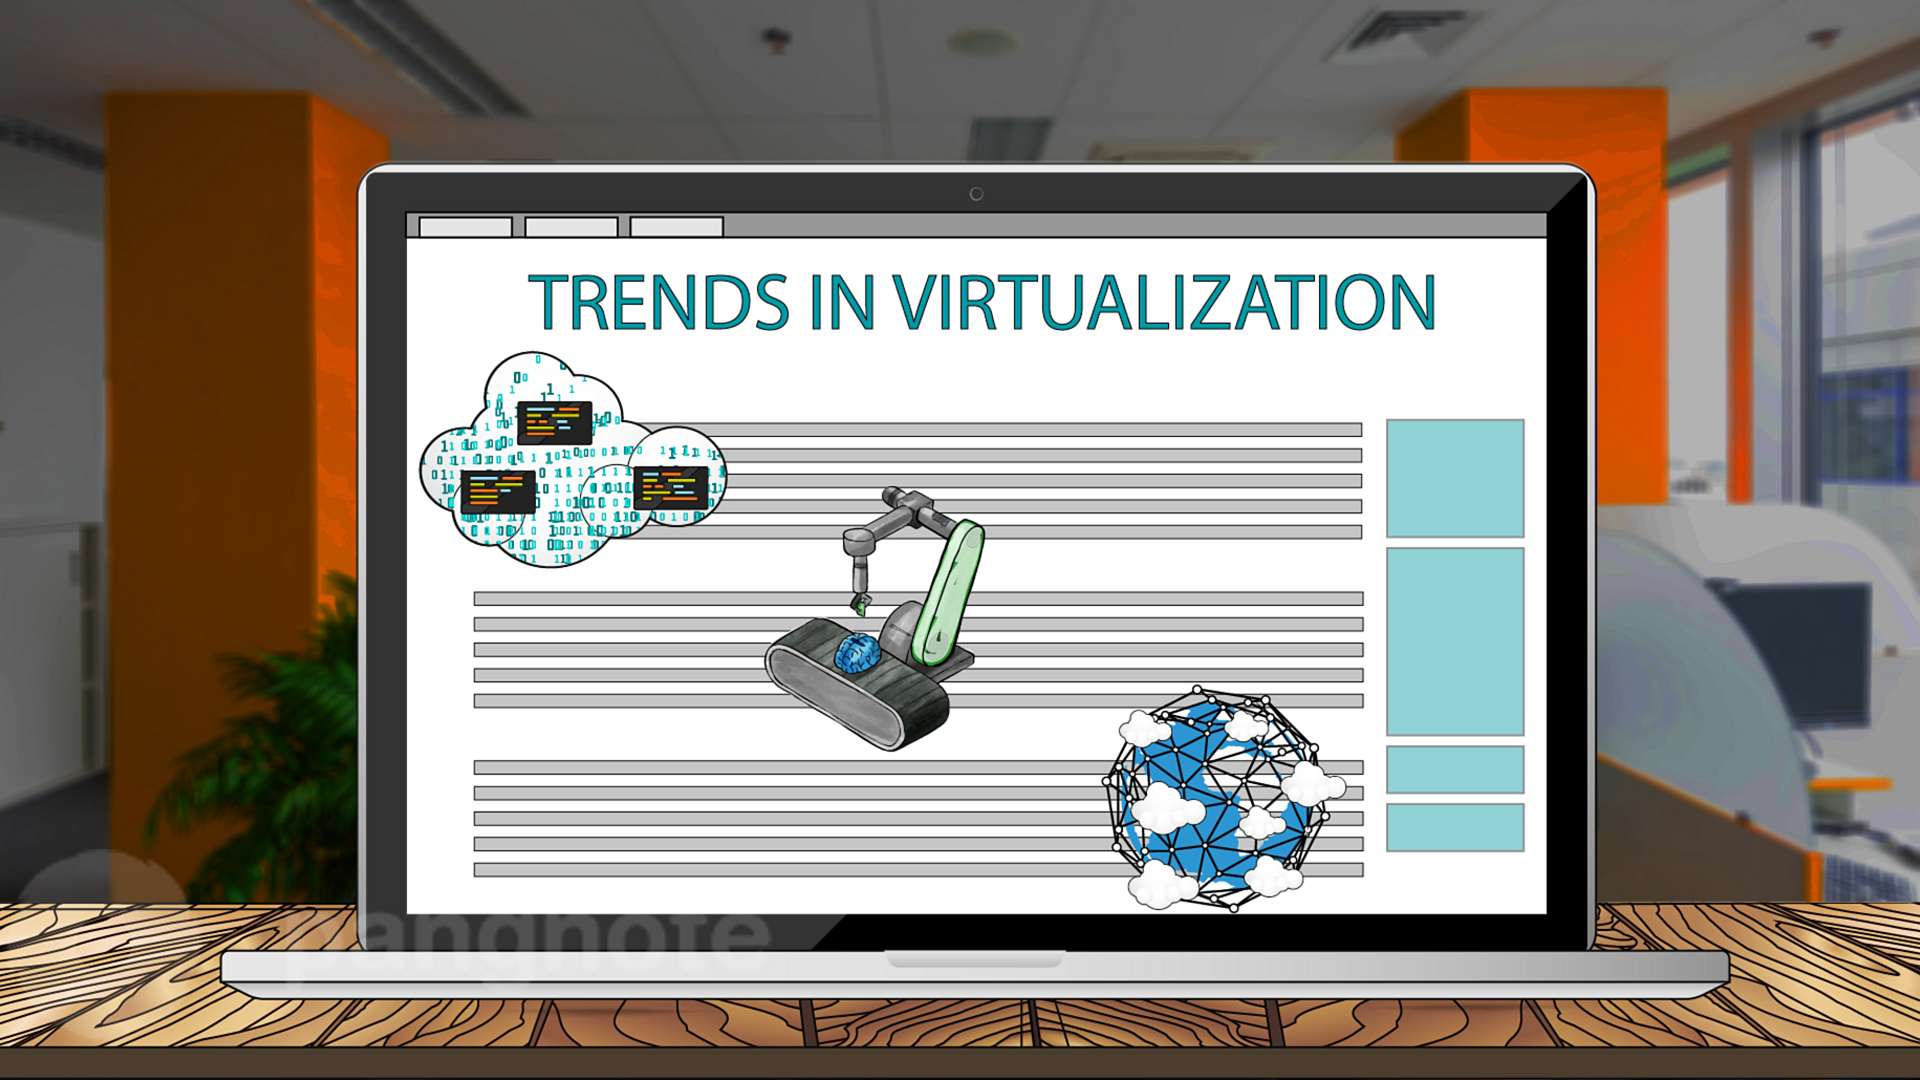 Serverless computing, multi-clouds and automation of IT infrastructure as trends in virtualization